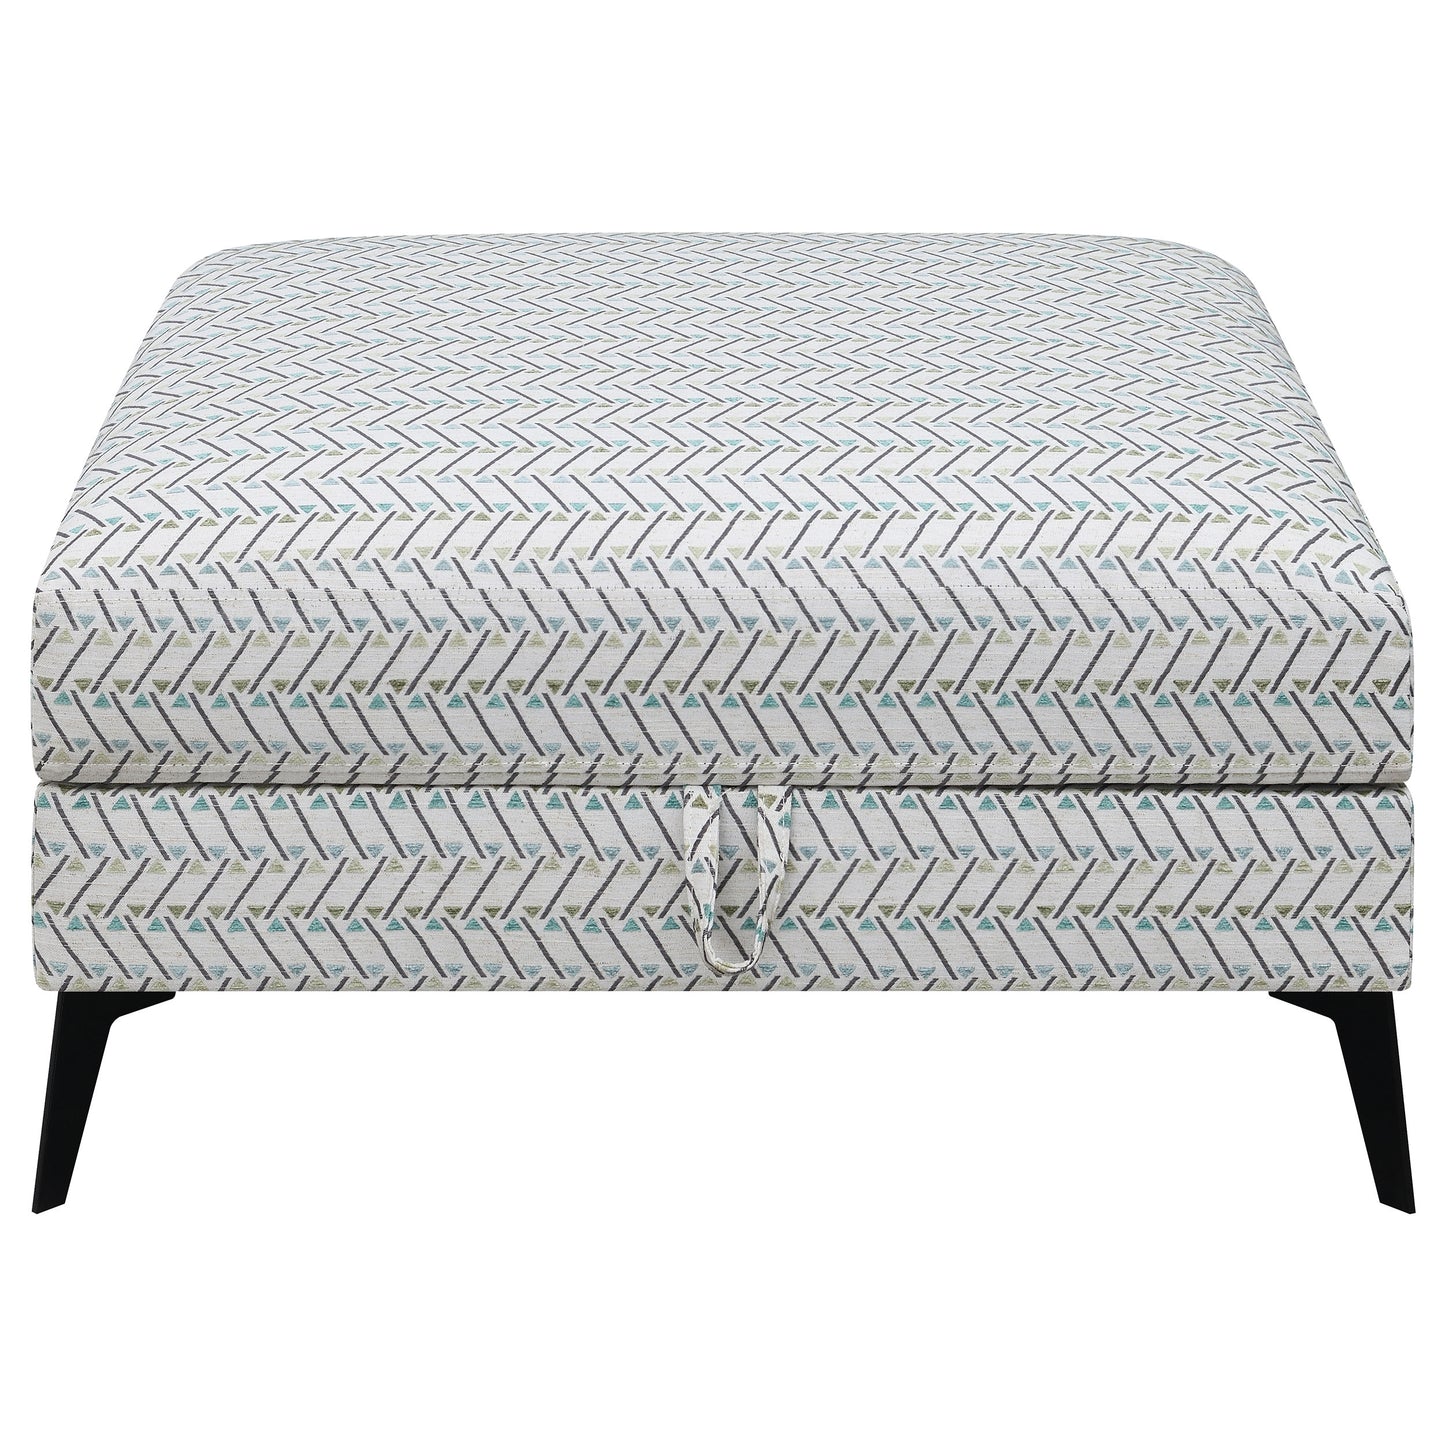 Clint Upholstered Ottoman with Tapered Legs Multi-color